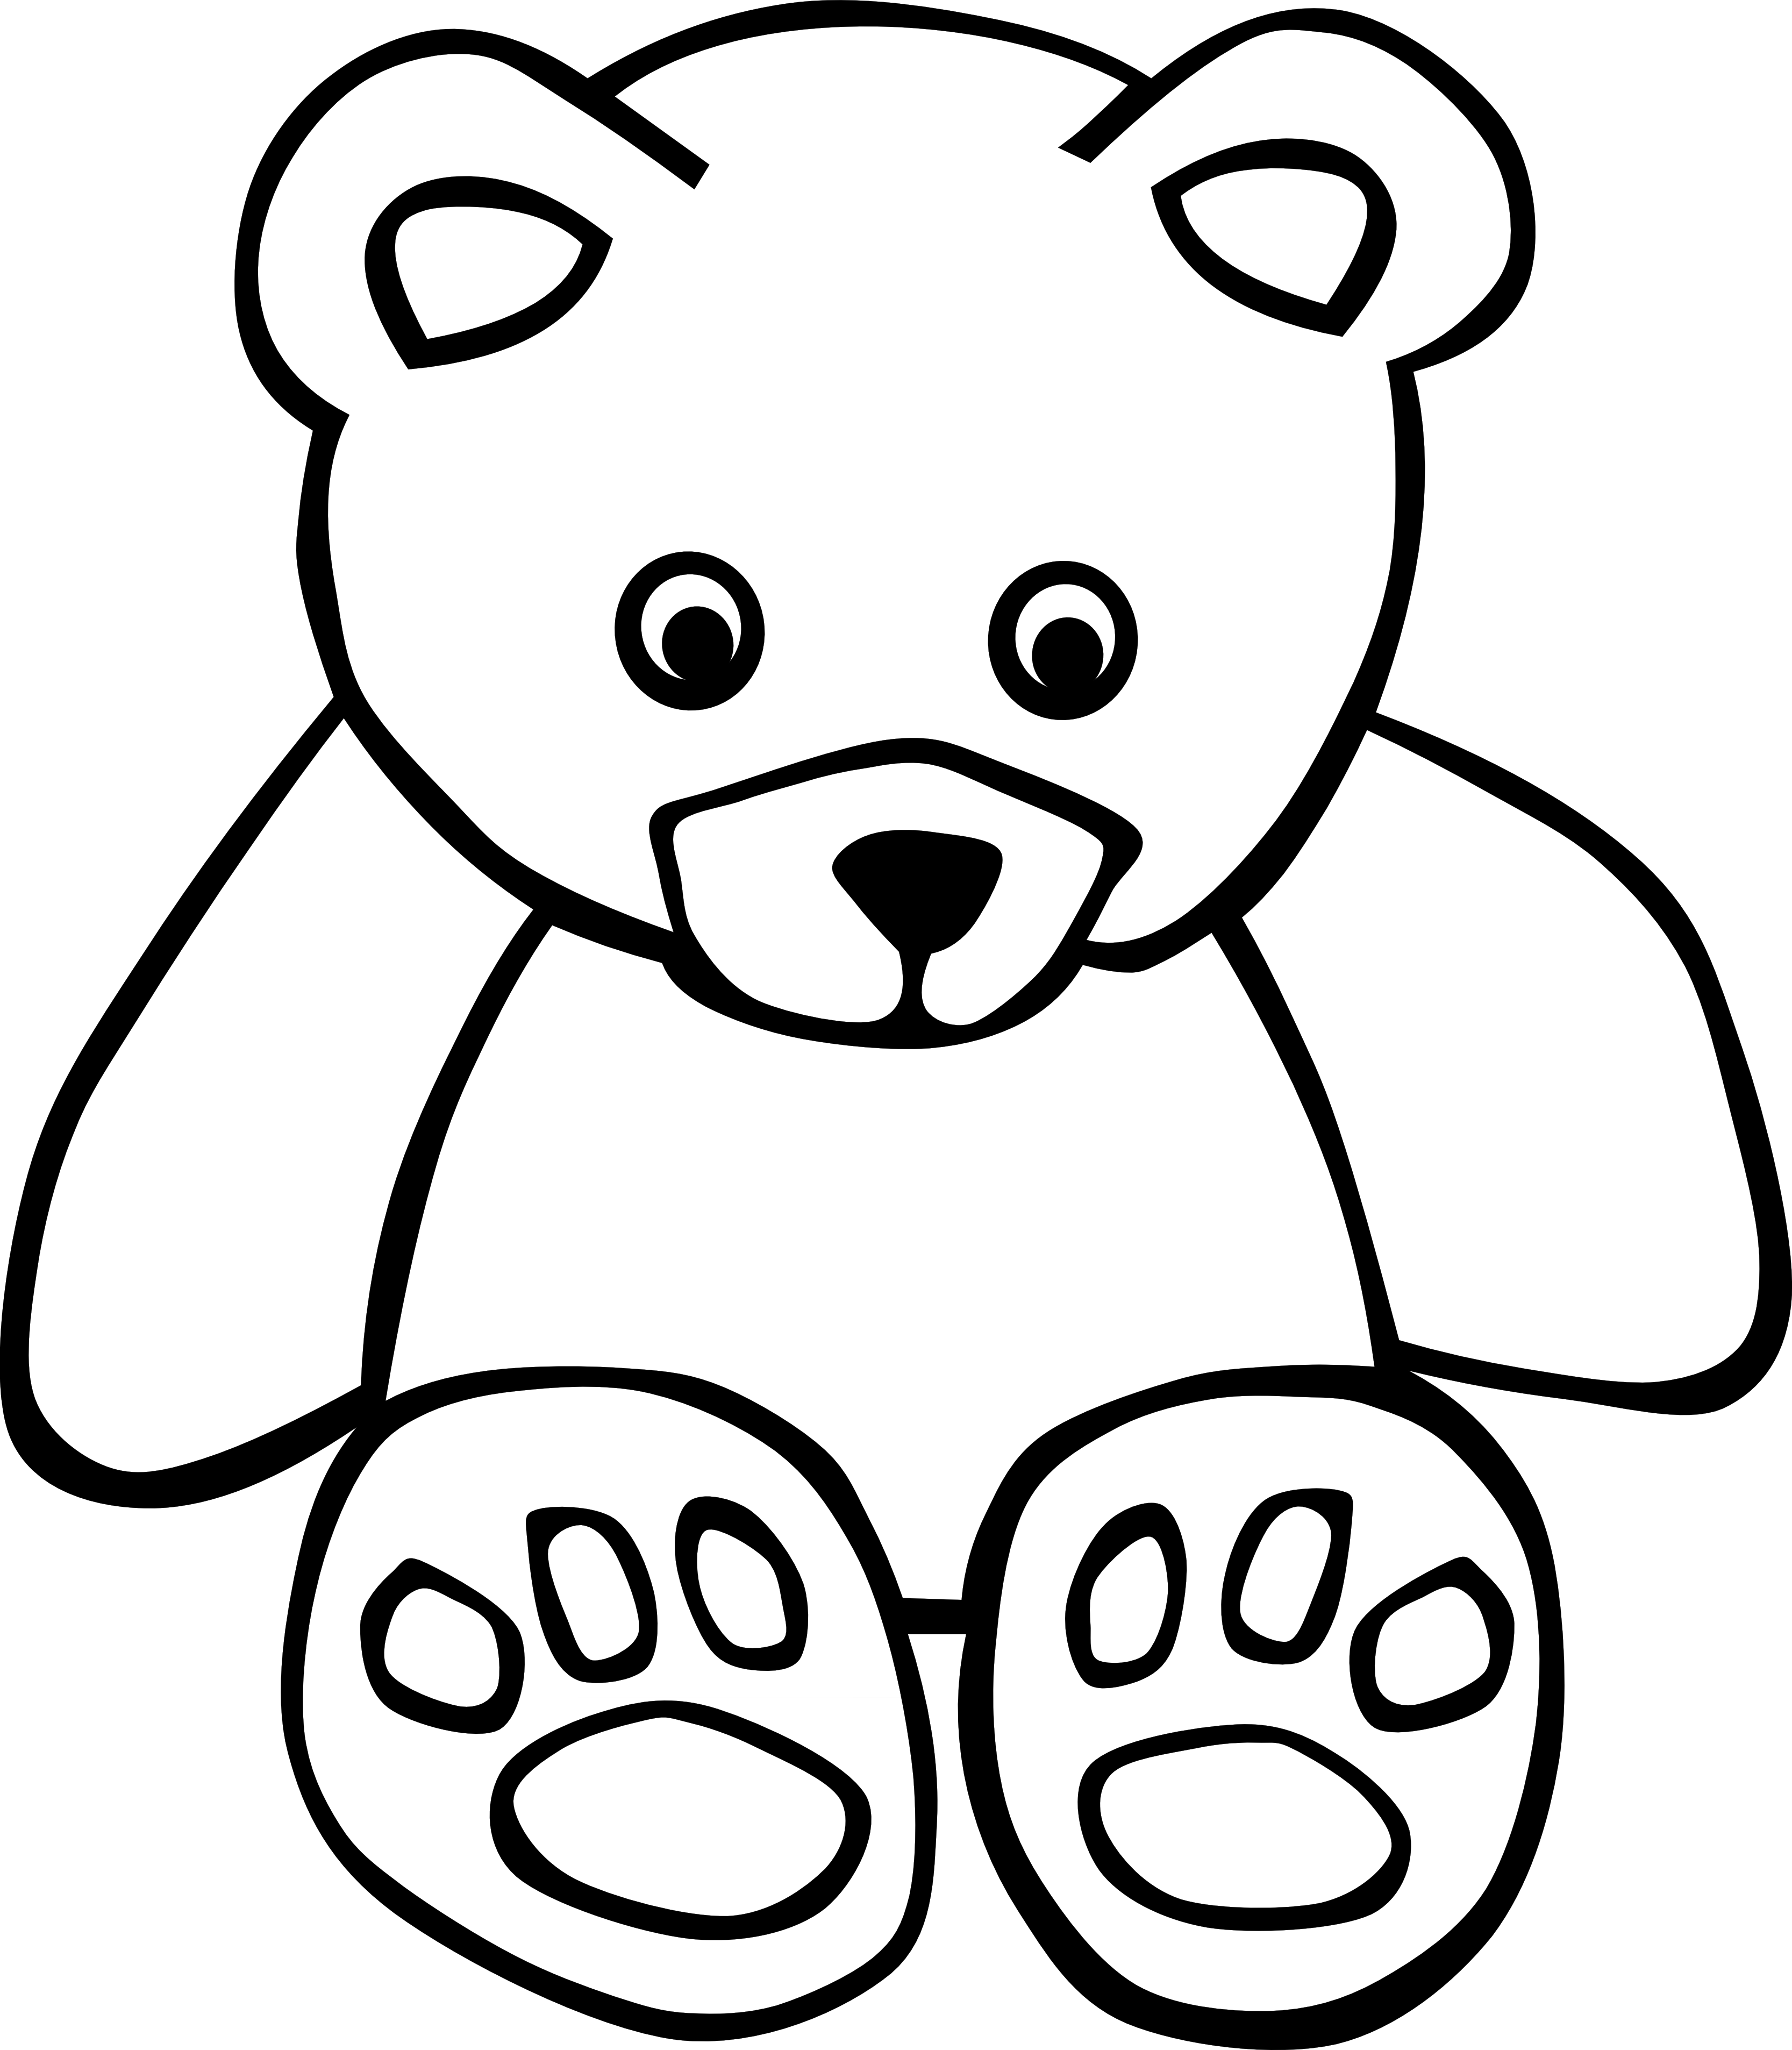 Teddy Bear Black And White Teddy Bear Clipart Black And White Free - Teddy Bear Black And White, Transparent background PNG HD thumbnail